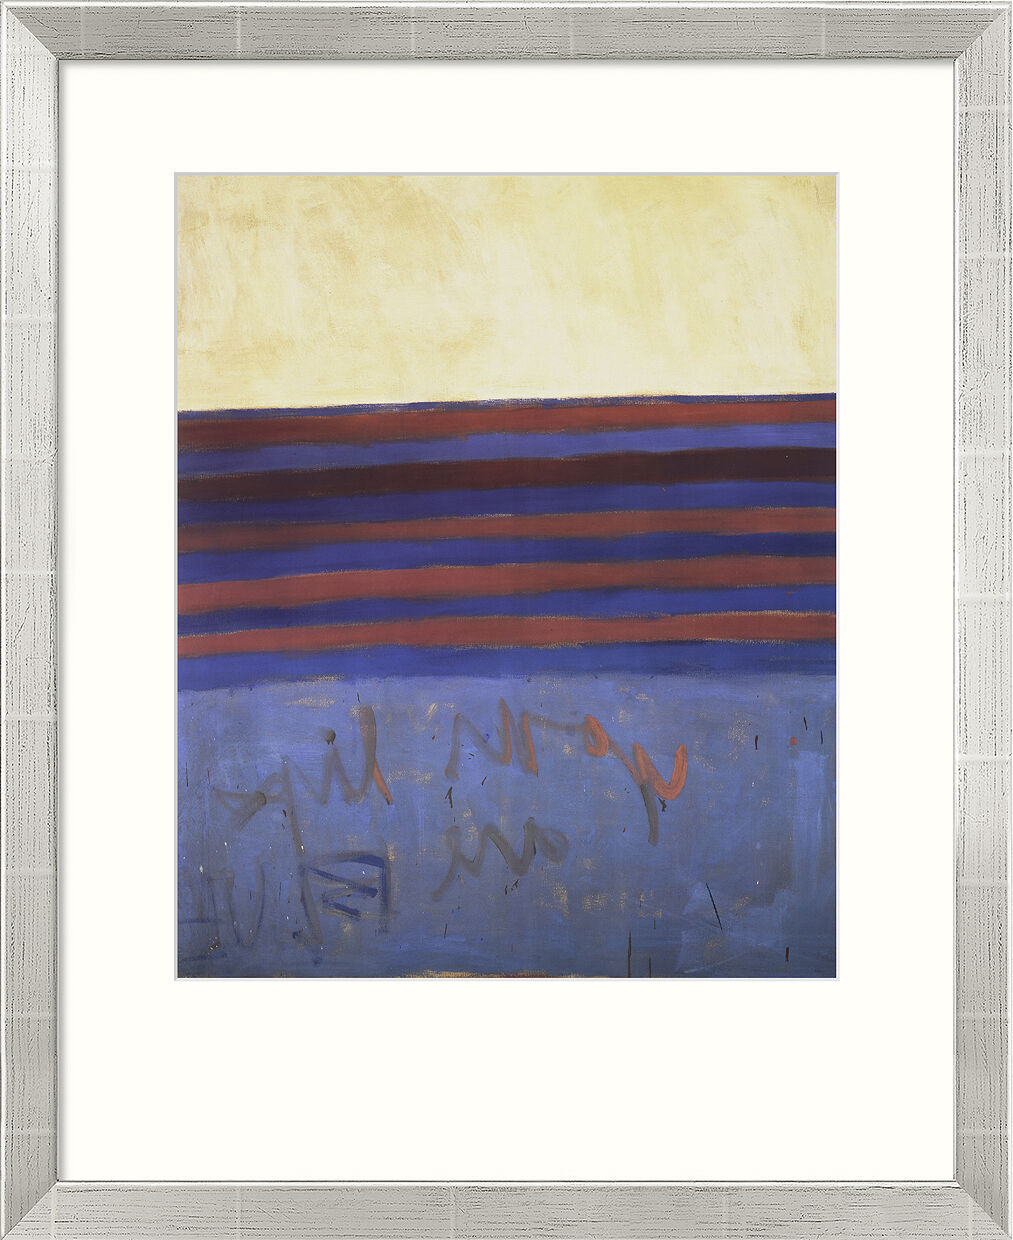 Picture "Your Lips are Blue" (1958), framed by Frank Stella